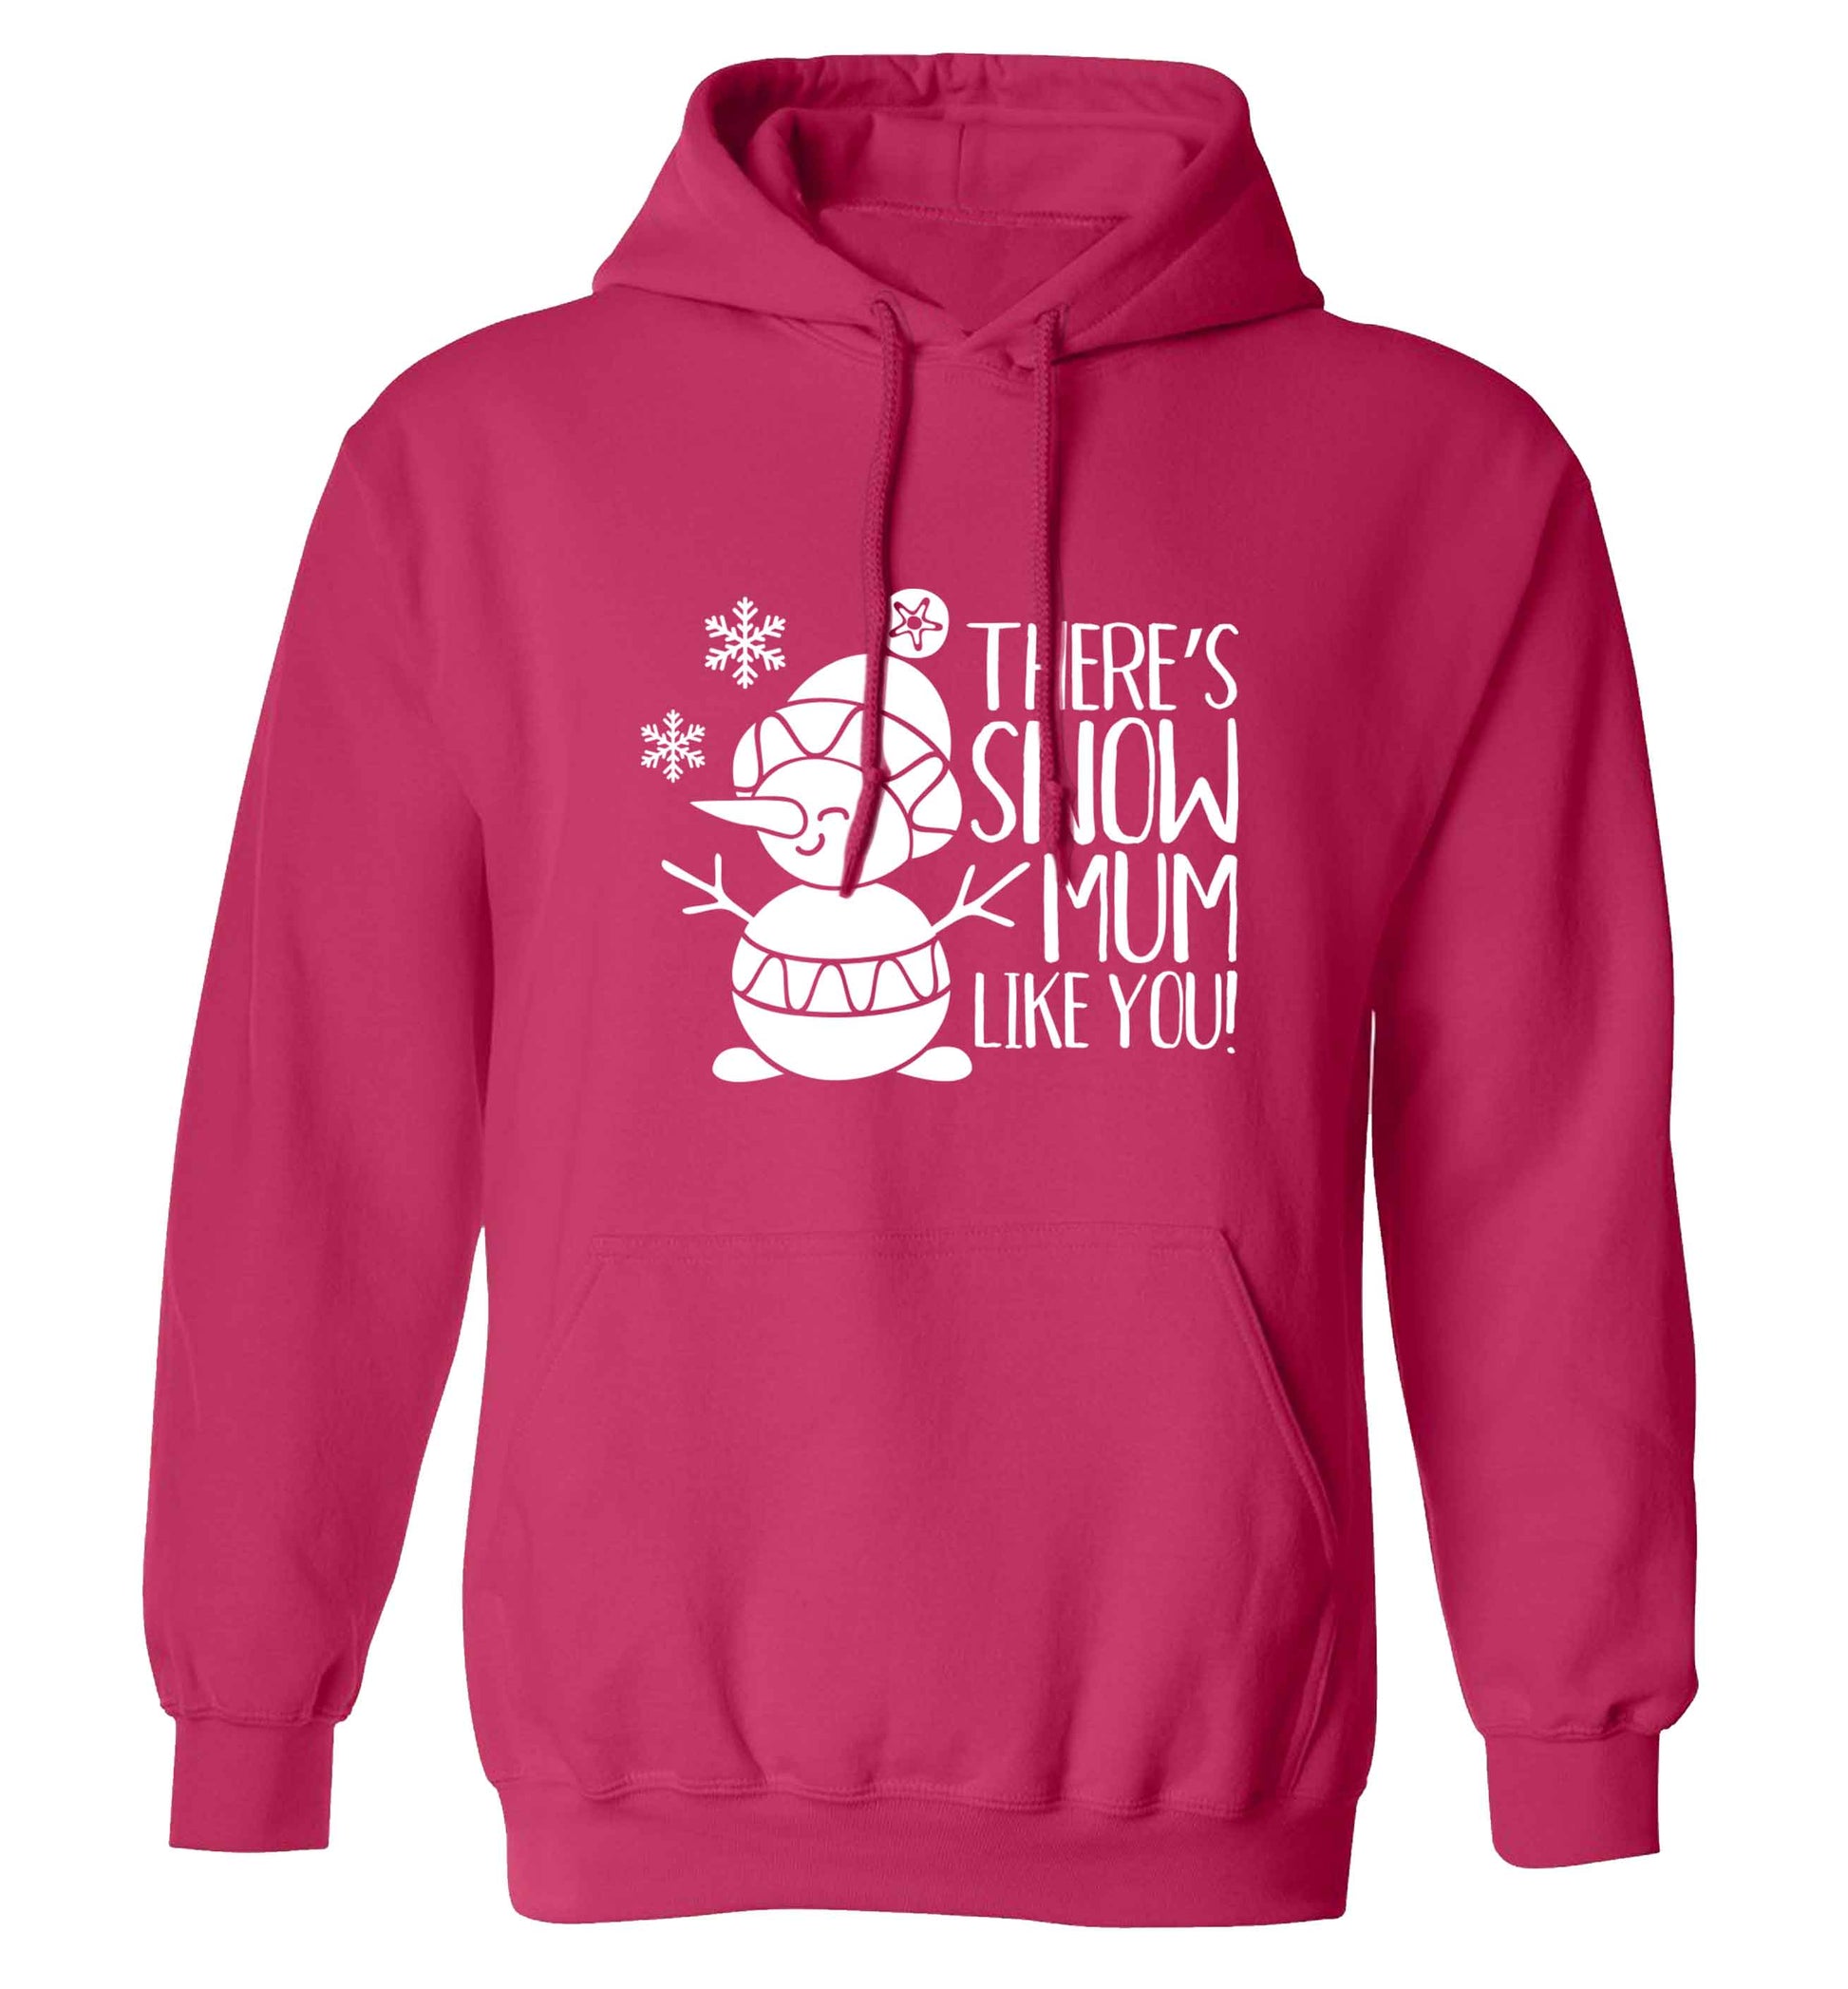 There's snow mum like you adults unisex pink hoodie 2XL